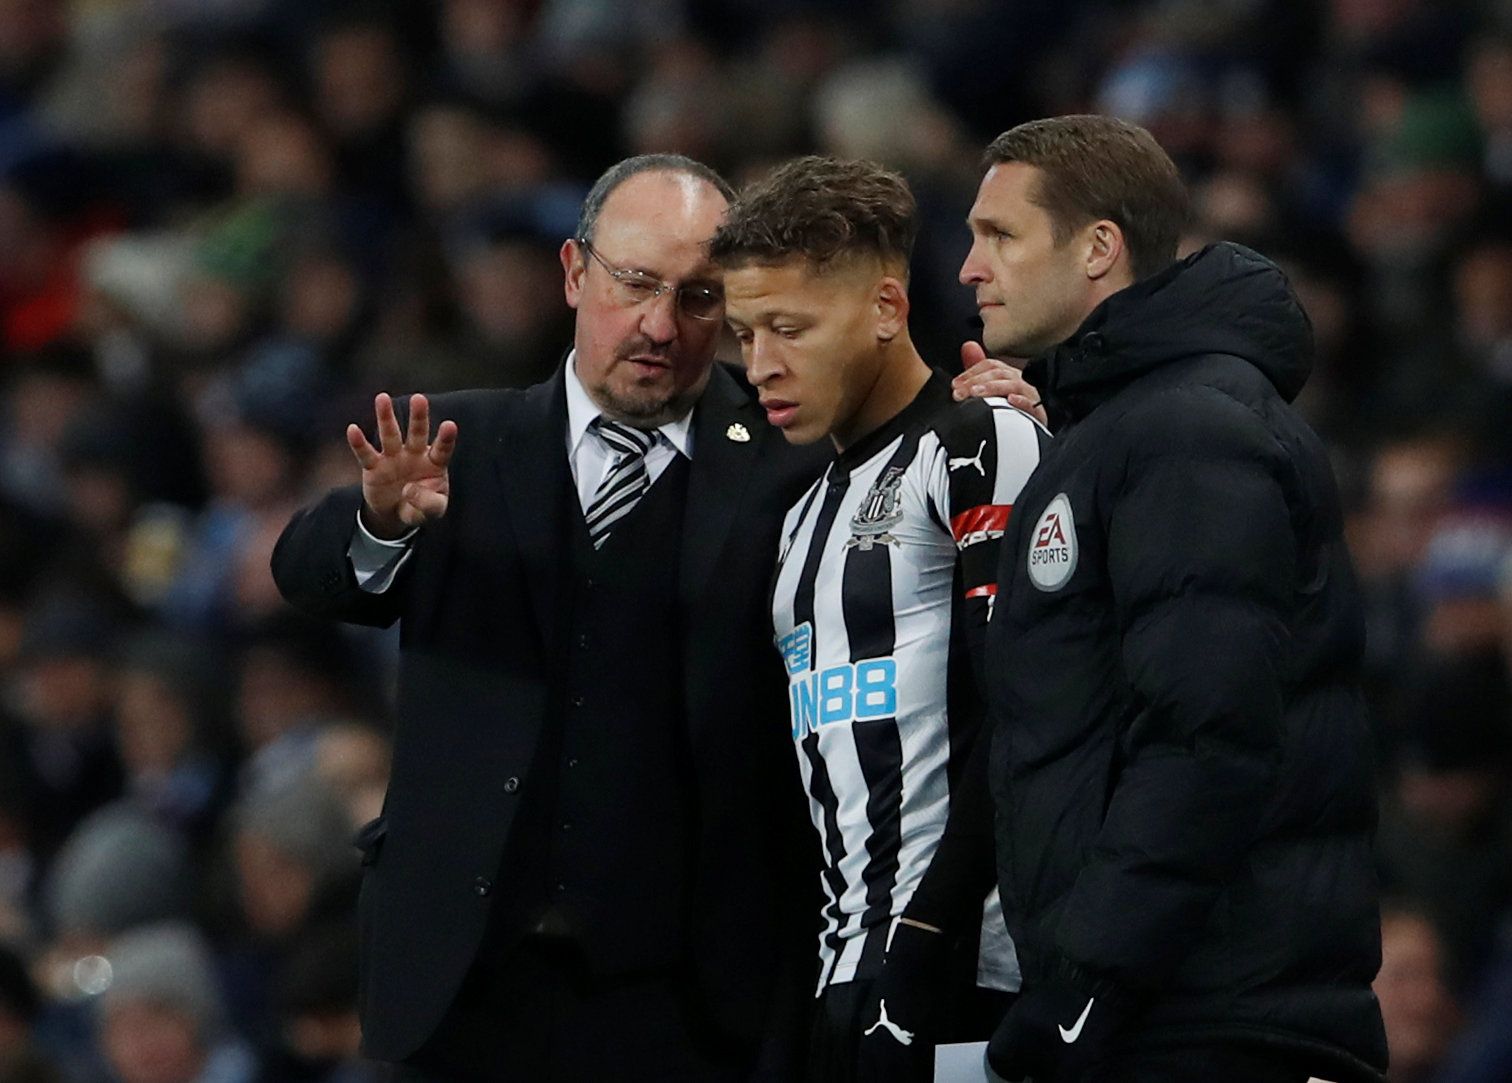 Soccer Football - Premier League - Manchester City vs Newcastle United - Etihad Stadium, Manchester, Britain - January 20, 2018   Newcastle United's Dwight Gayle talks to manager Rafael Benitez as he prepares to come on      Action Images via Reuters/Lee Smith    EDITORIAL USE ONLY. No use with unauthorized audio, video, data, fixture lists, club/league logos or 